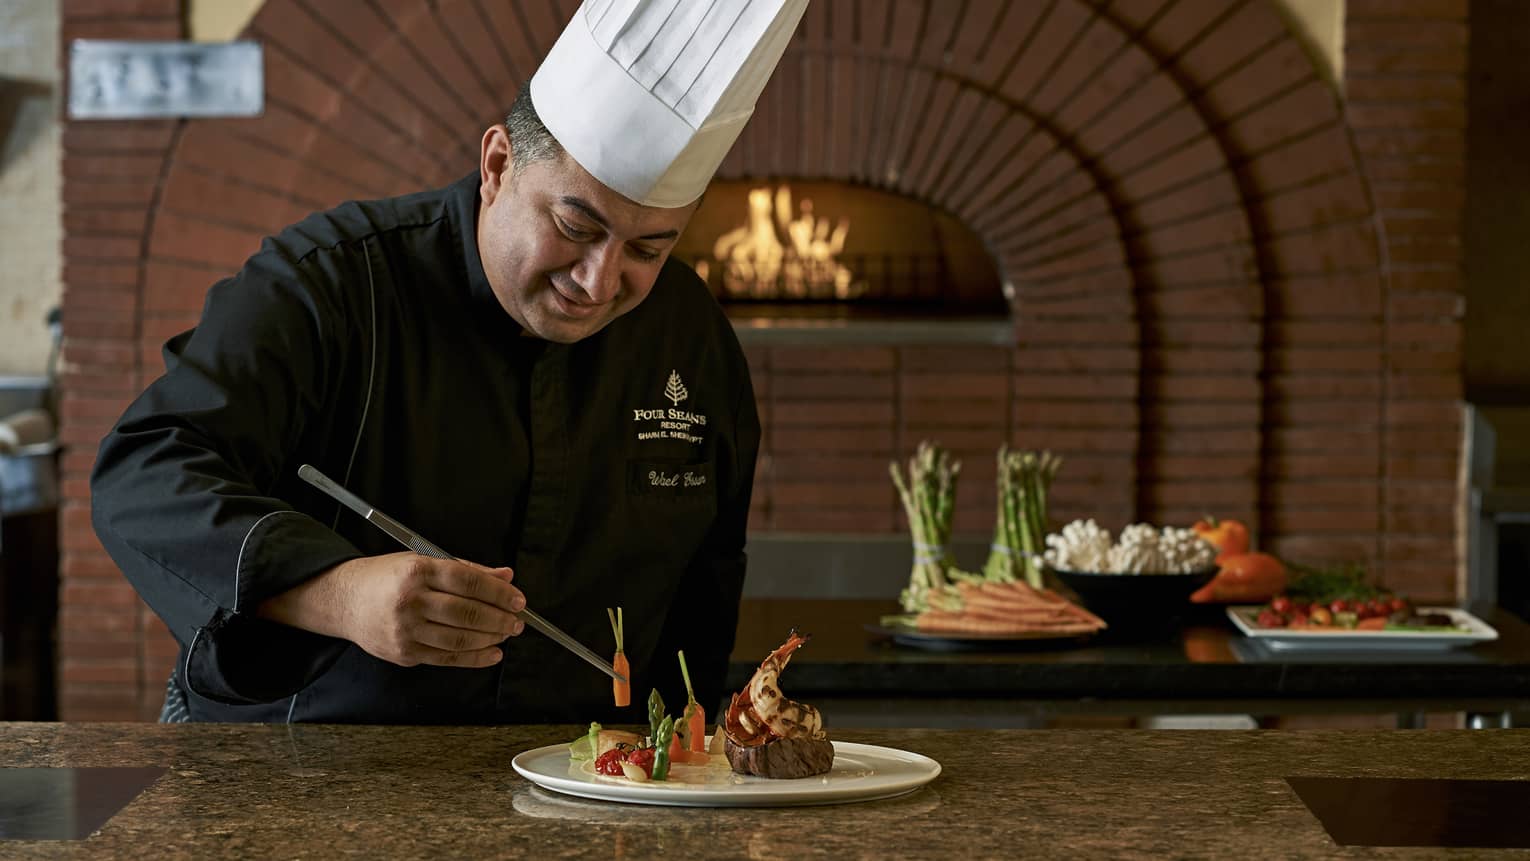 Chef in uniform holds tweezers, arranges vegetables on plate with large steak, lobster tail by wood-burning oven